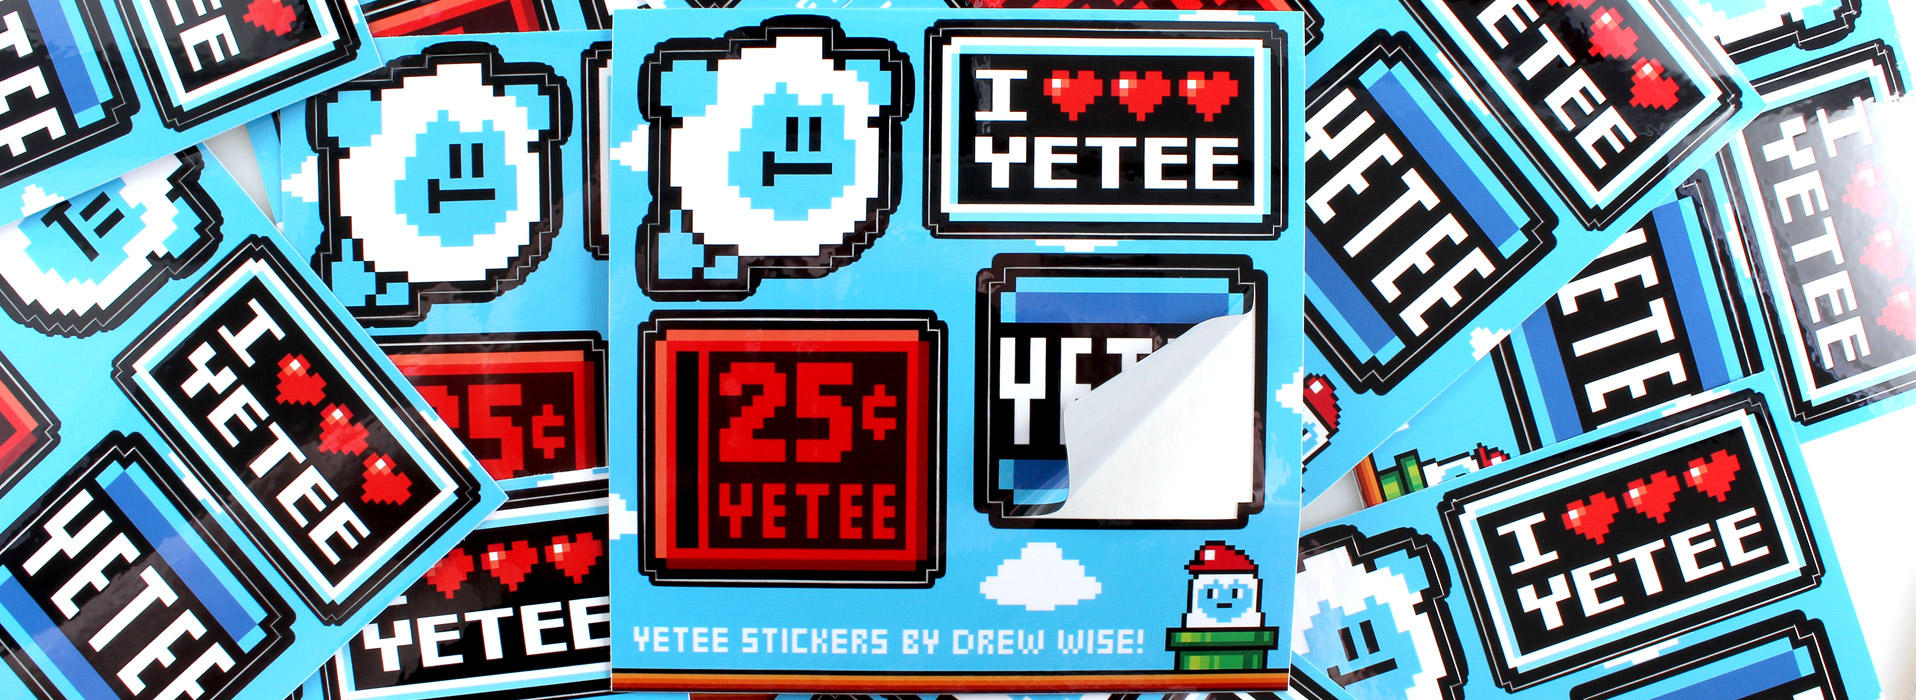 The Yetee Square Stickers